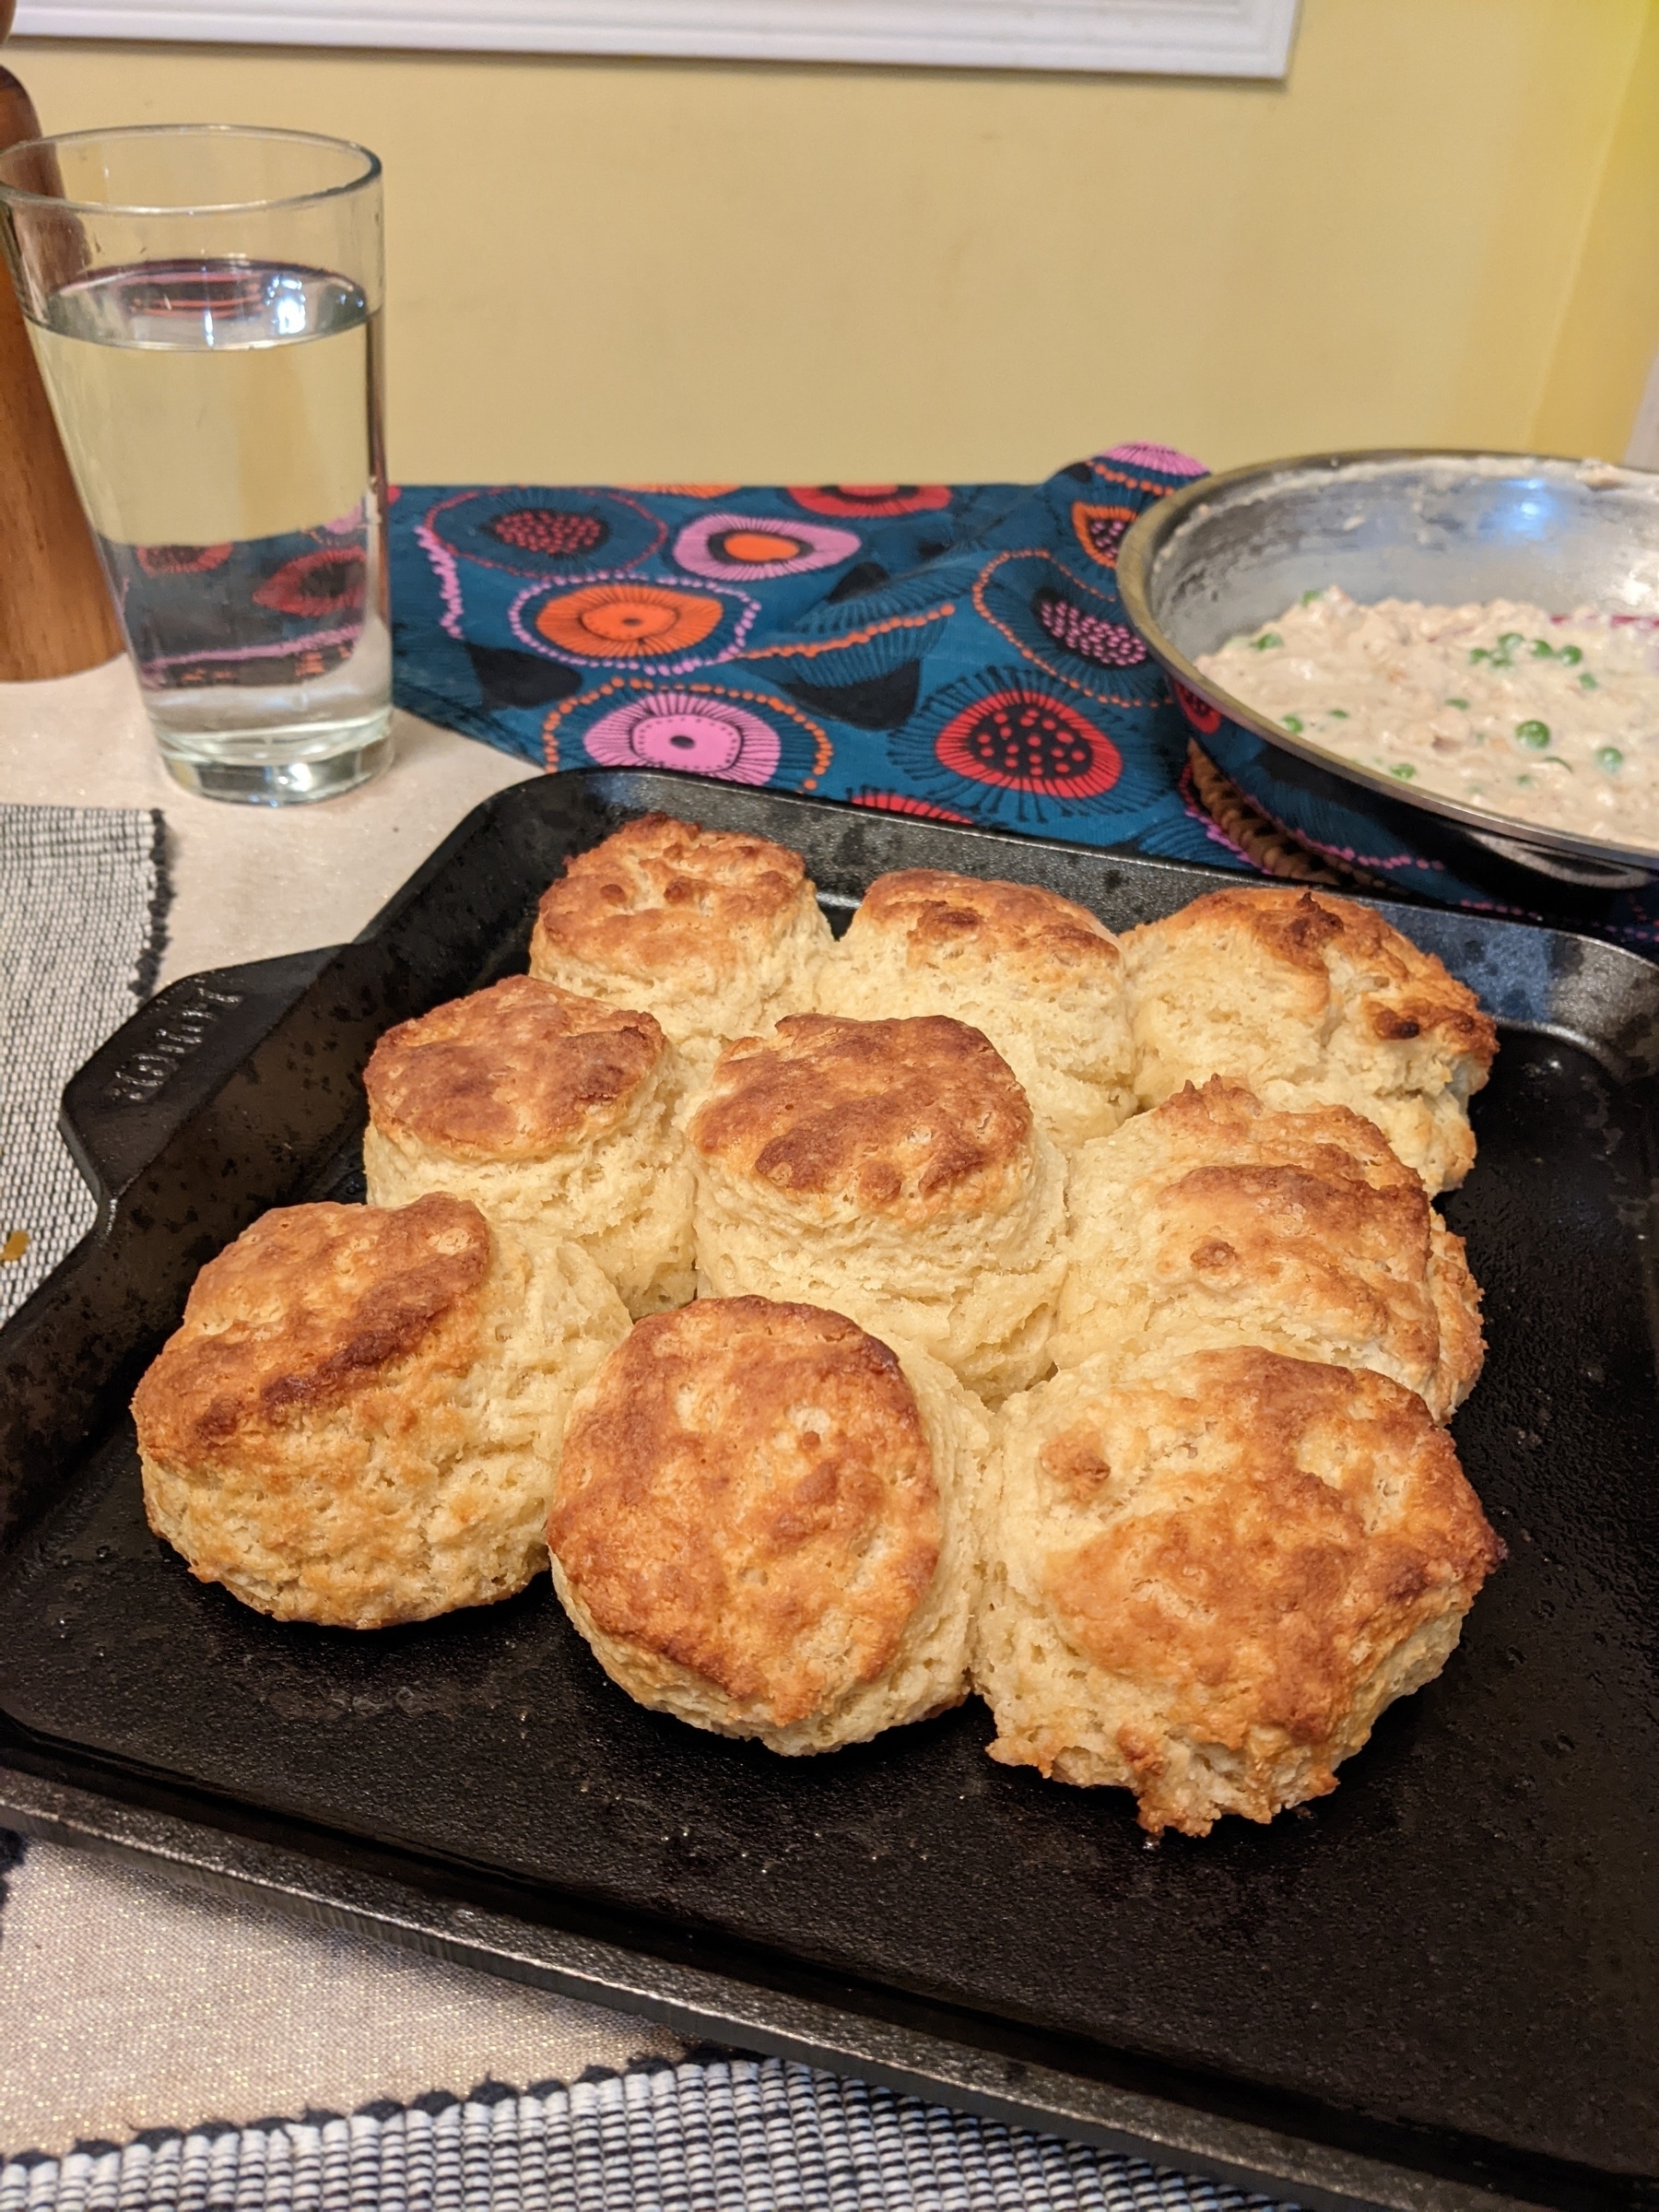 Nine golden topped biscuits baked touching on a cast iron griddle, with a pan of creamed tuna